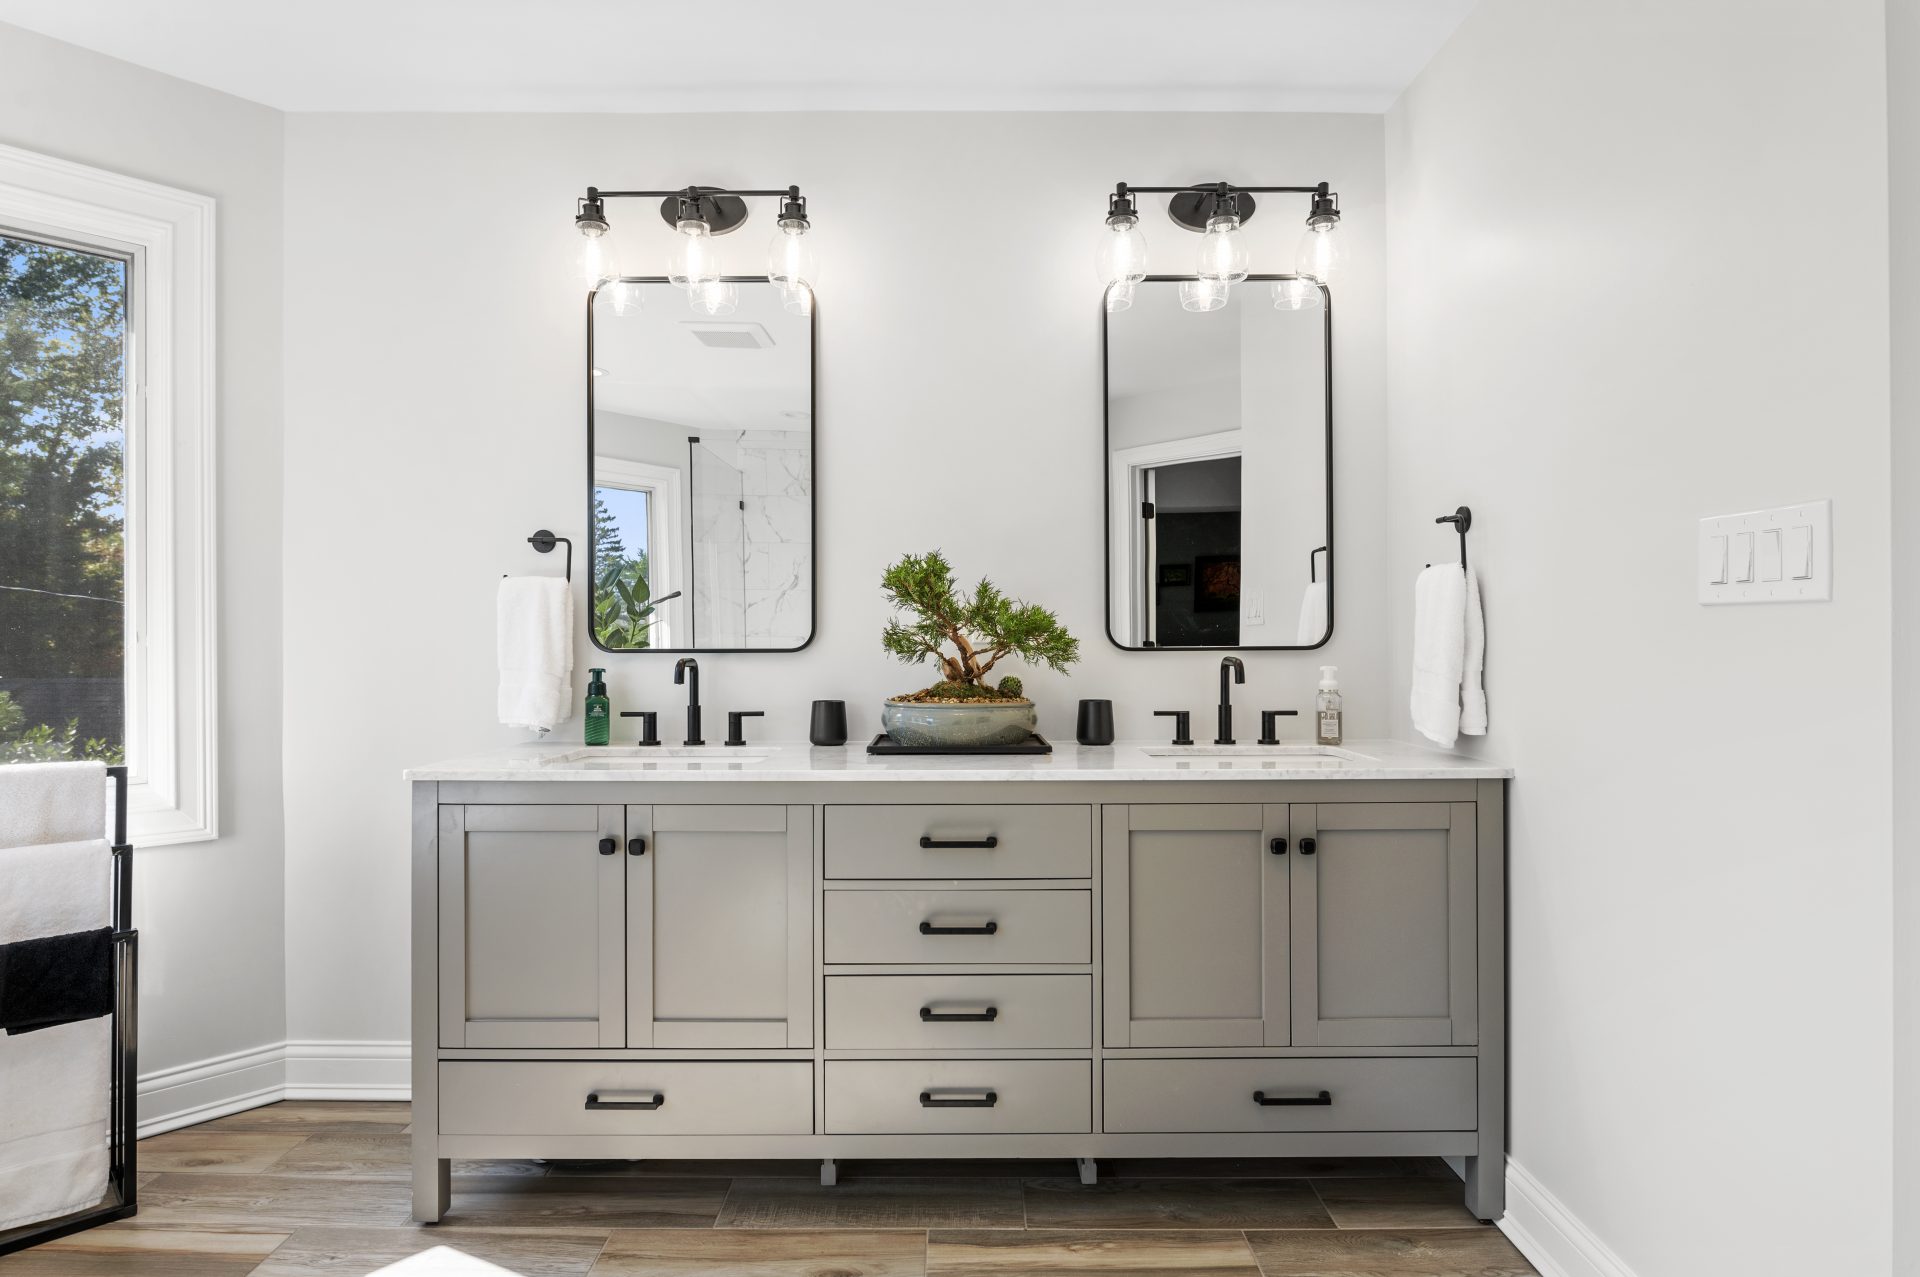 Remodeled master bathroom with a double sink vanity, two mirrors, black fixtures, tiles that look like hardwood, and two light fixtures